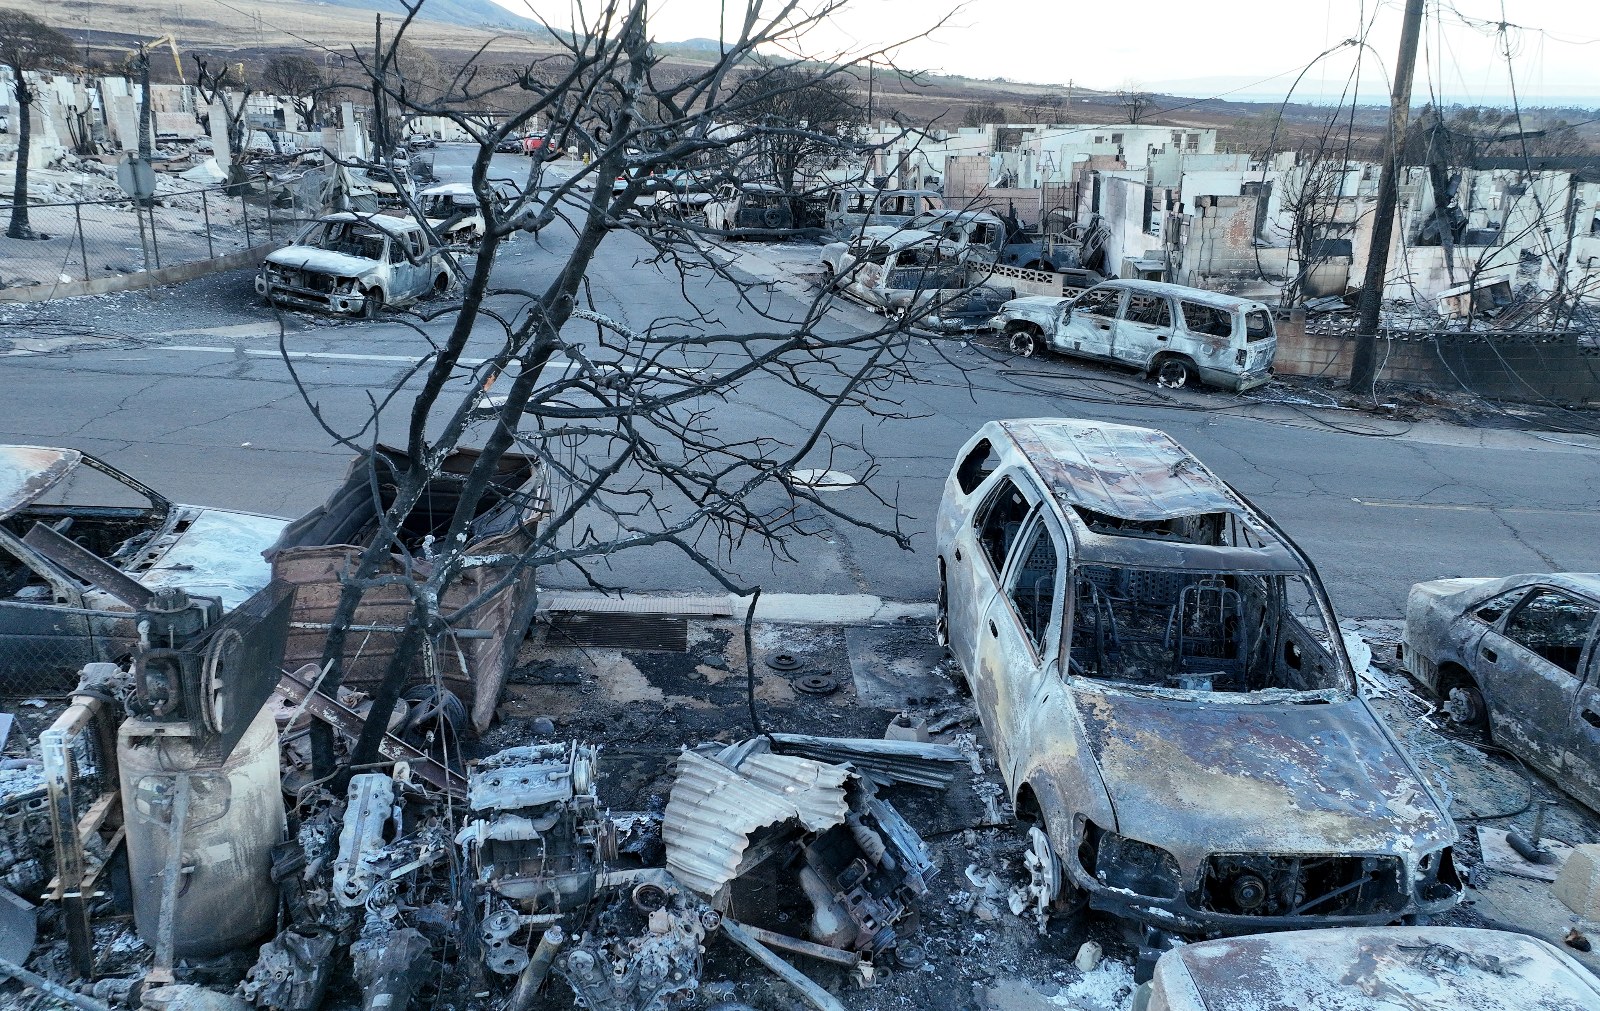 Photo of a charred tree, burned cars, and crumpled roofing on the ground